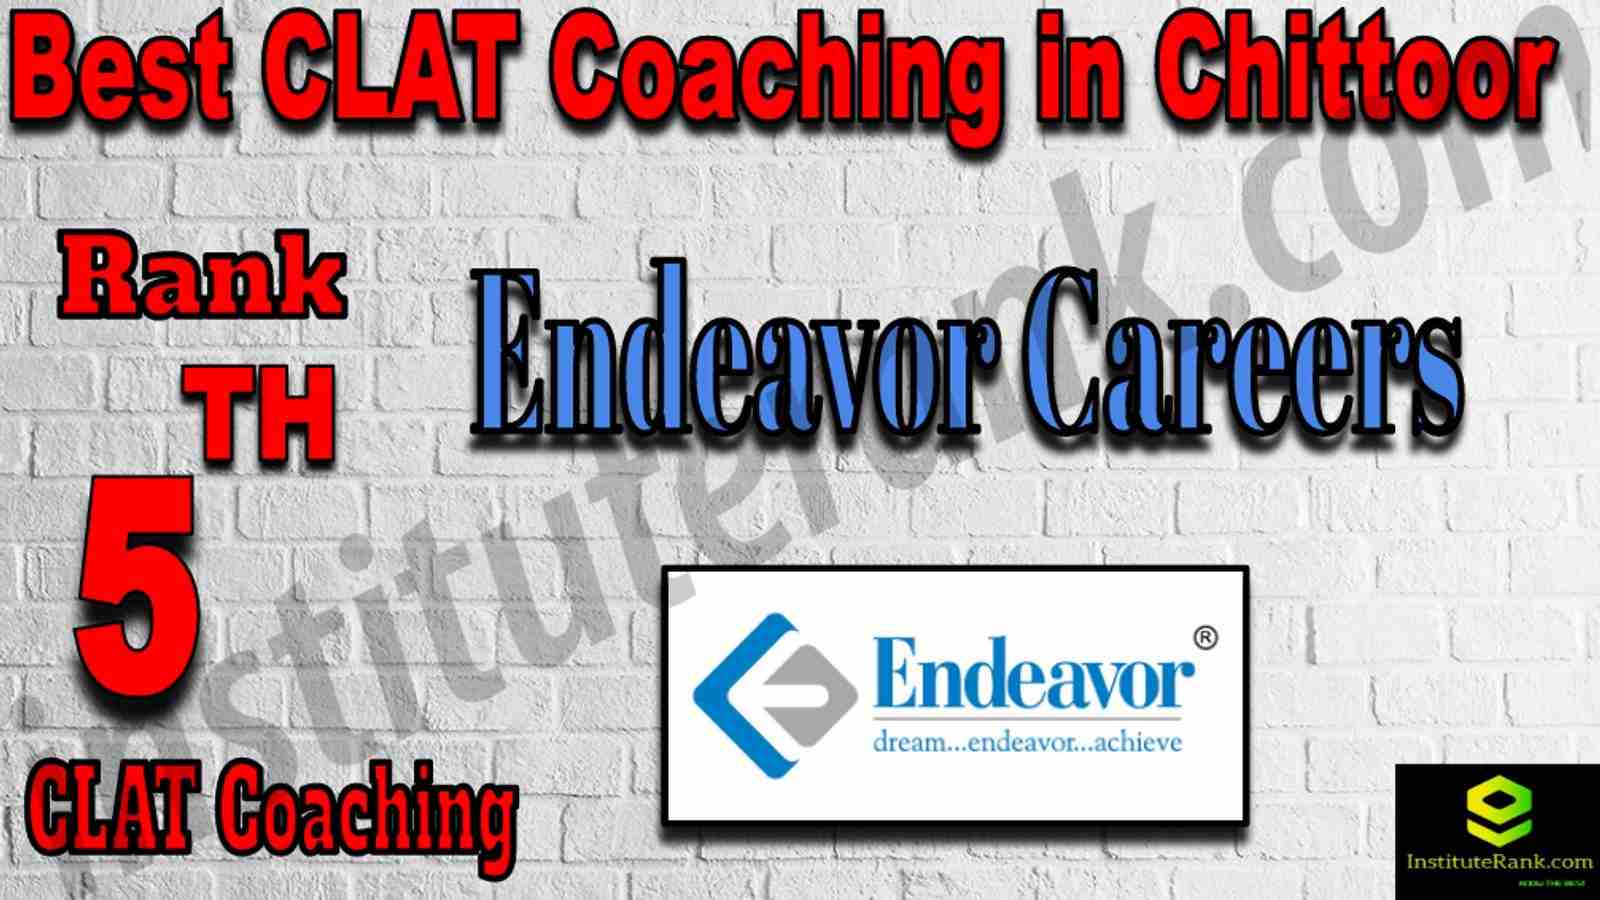 5th Best CLAT Coaching in Chittoor